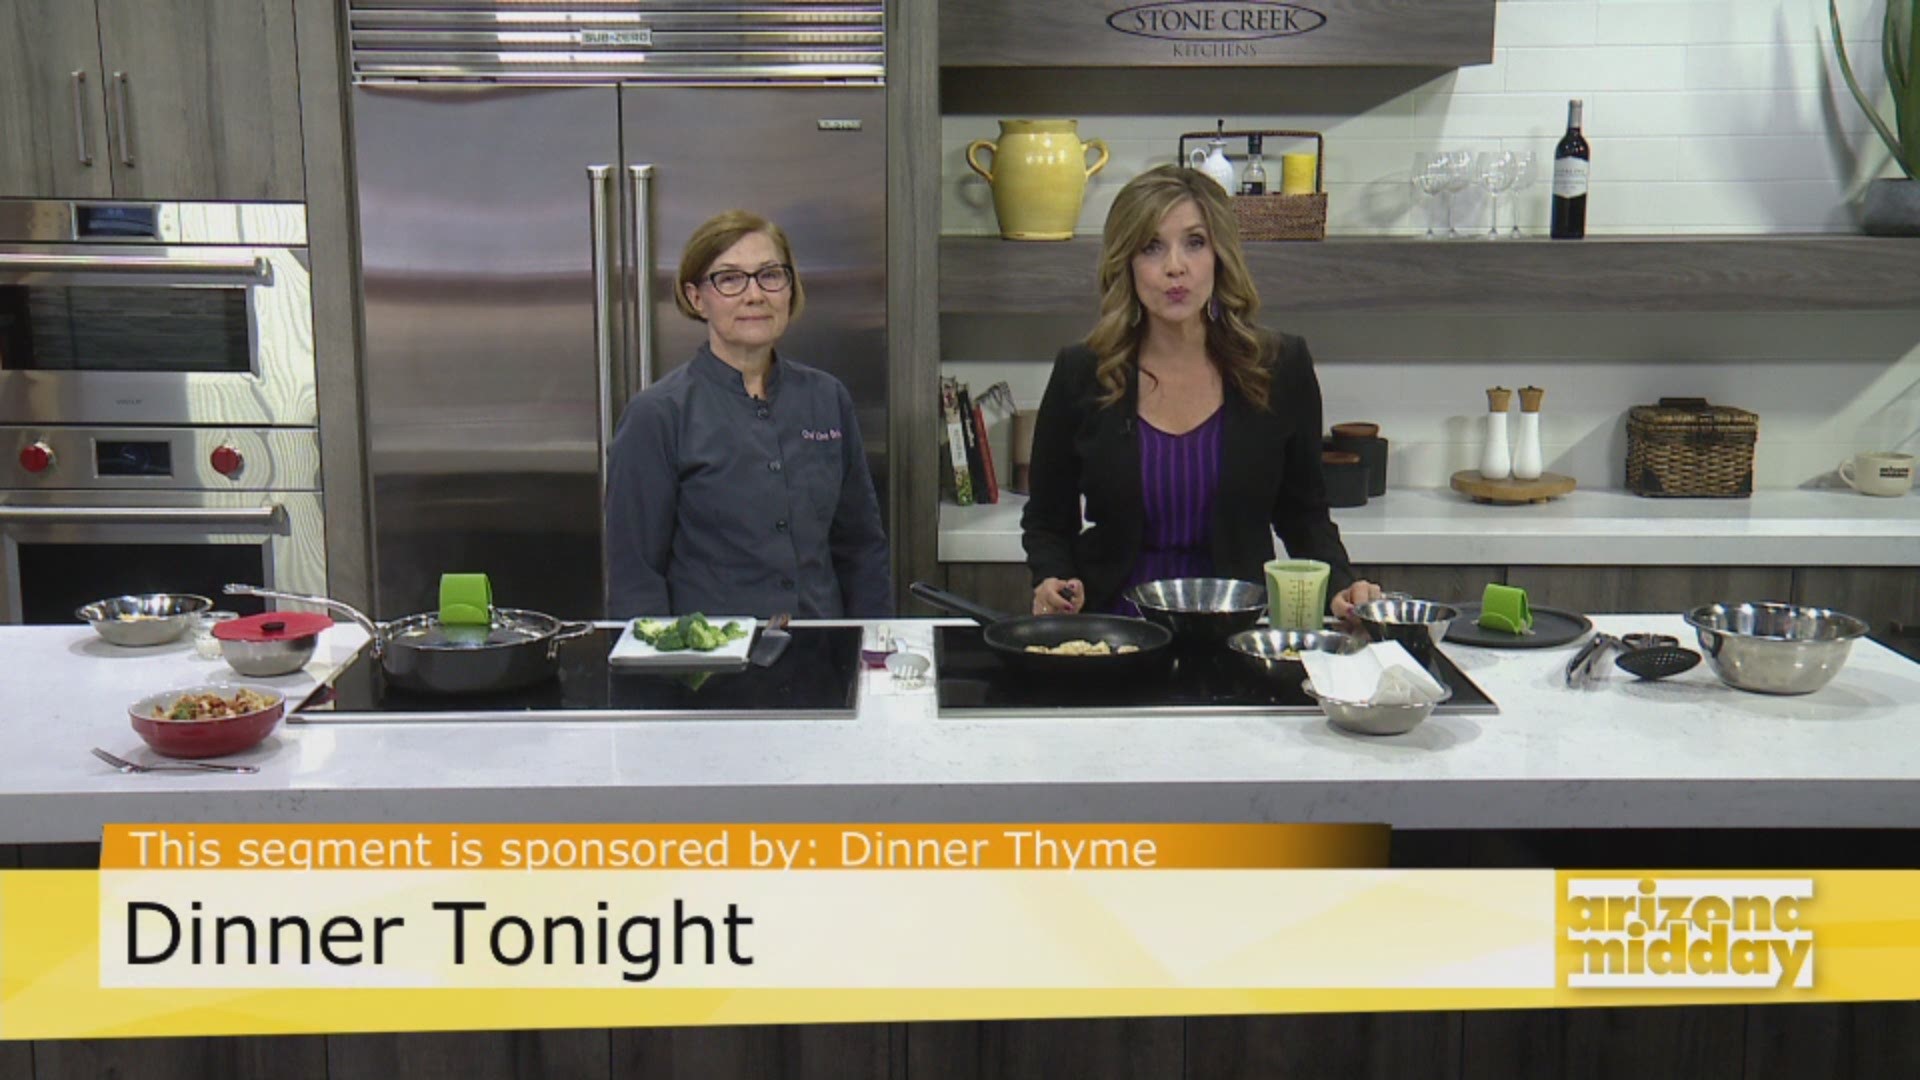 Make dinner time delicious and easy with Dinner Thyme’s Chef Lisa’s easy one pan dinner.